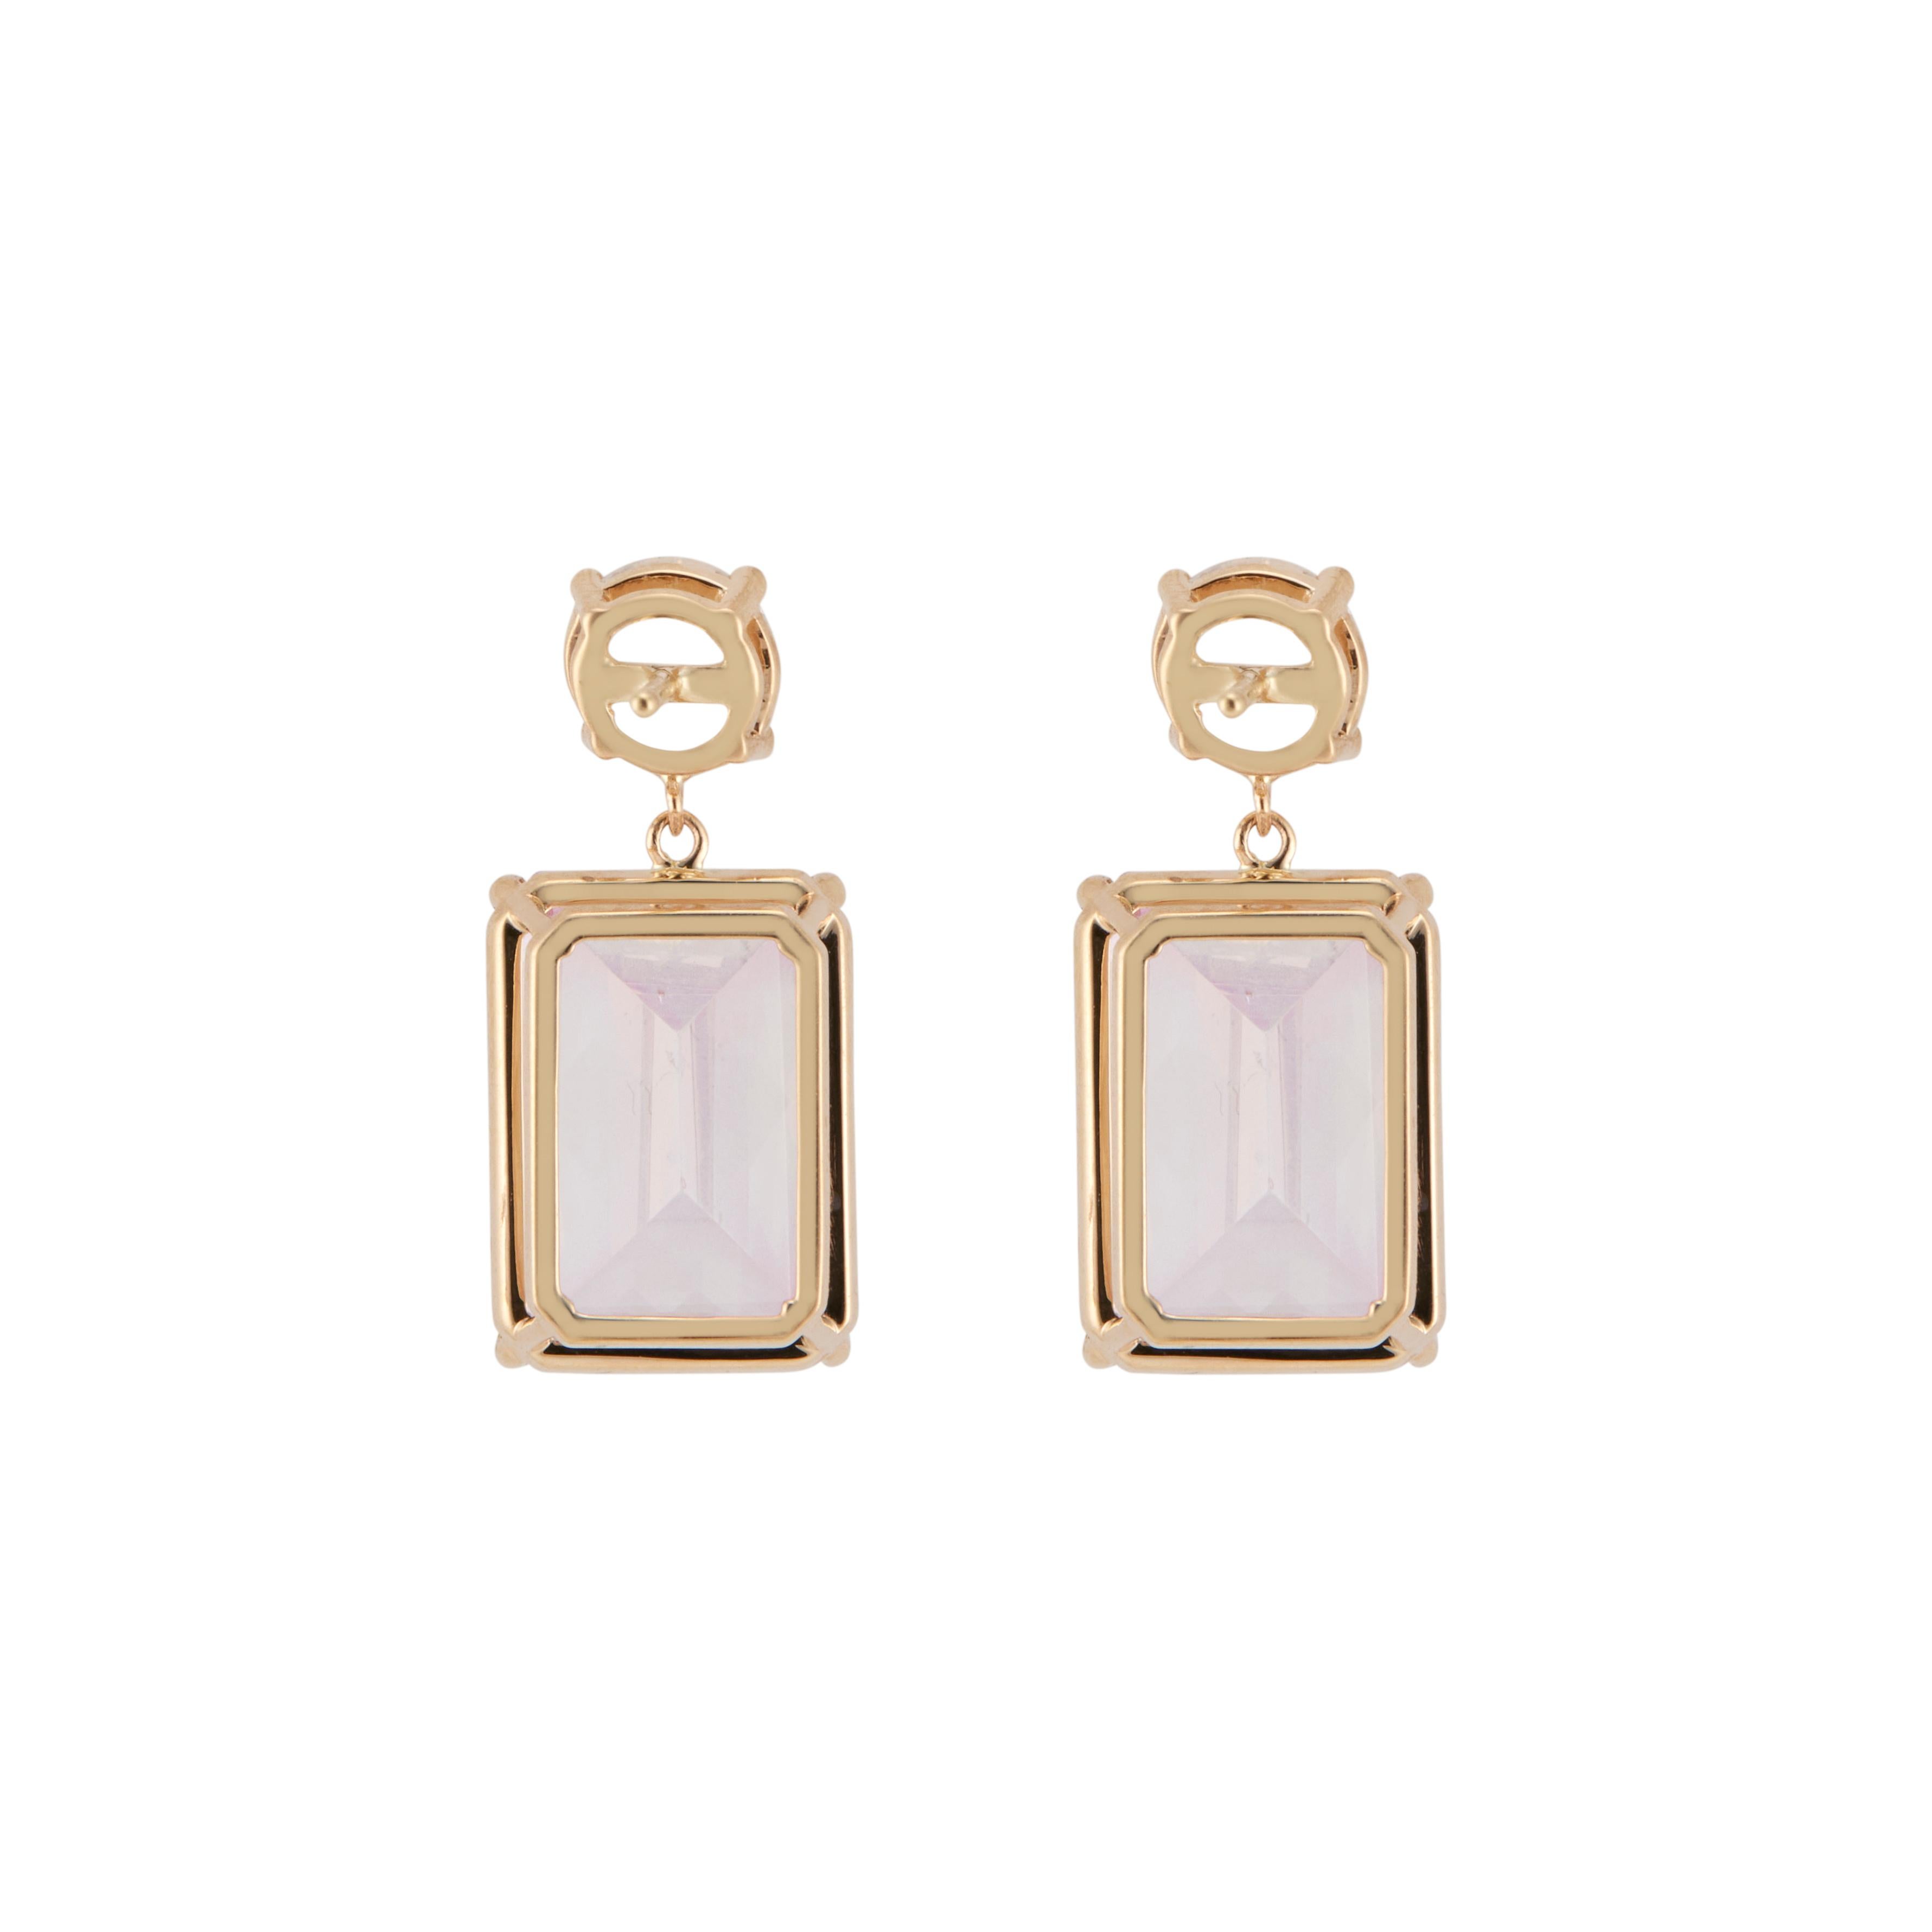 Peter Suchy 17.4 Carat Pink Topaz White Sapphire Yellow Gold Dangle Earrings In New Condition For Sale In Stamford, CT